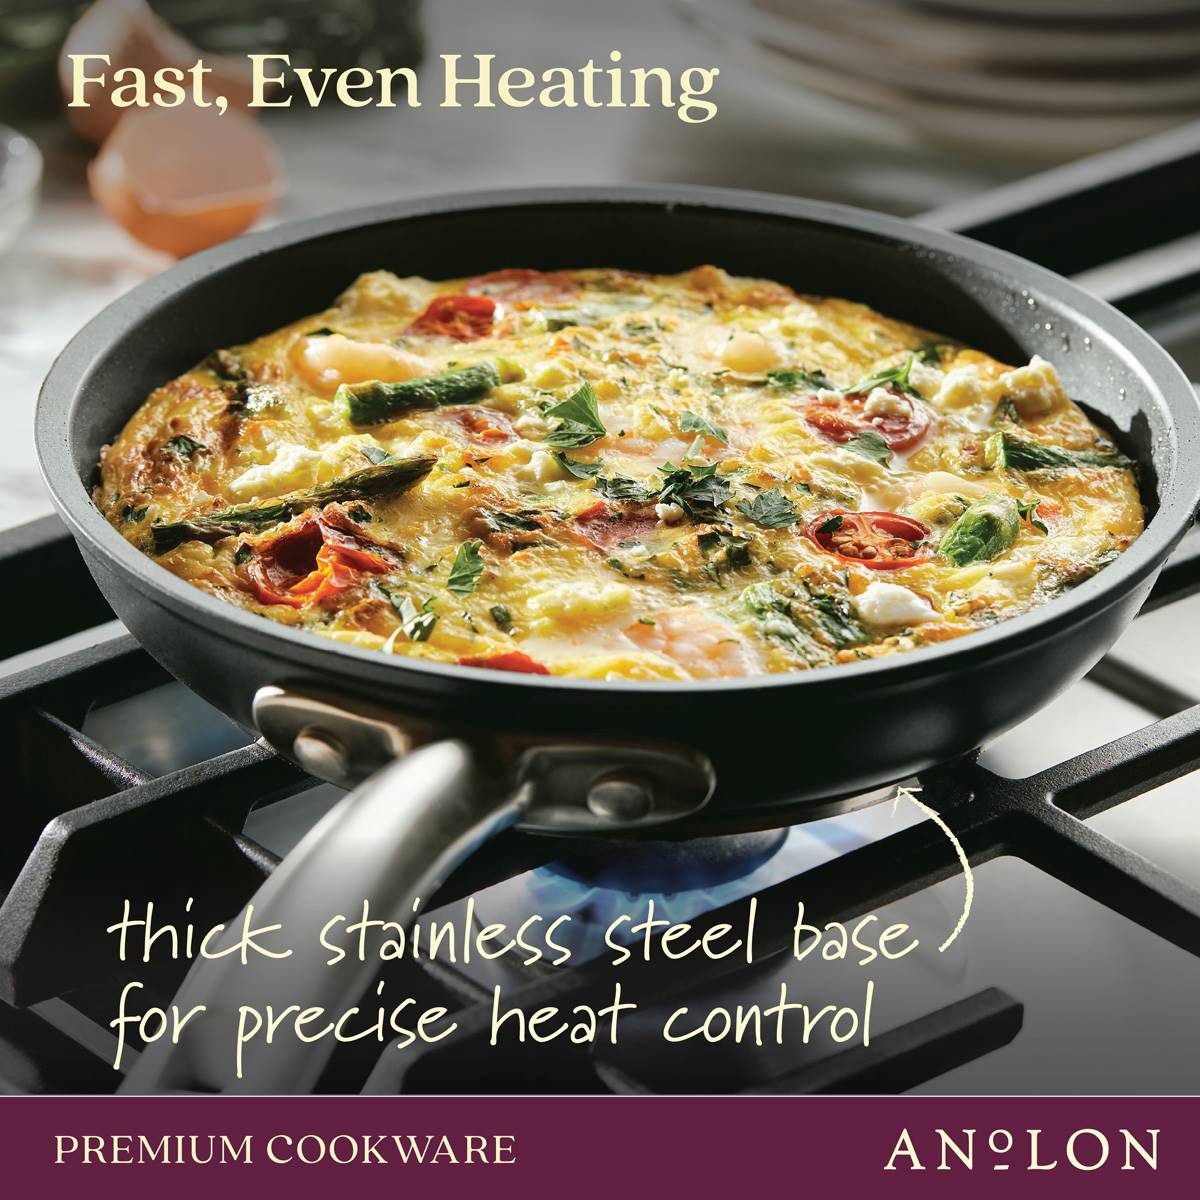 Anolon(R) Accolade 8in. Hard-Anodized Nonstick Frying Pan